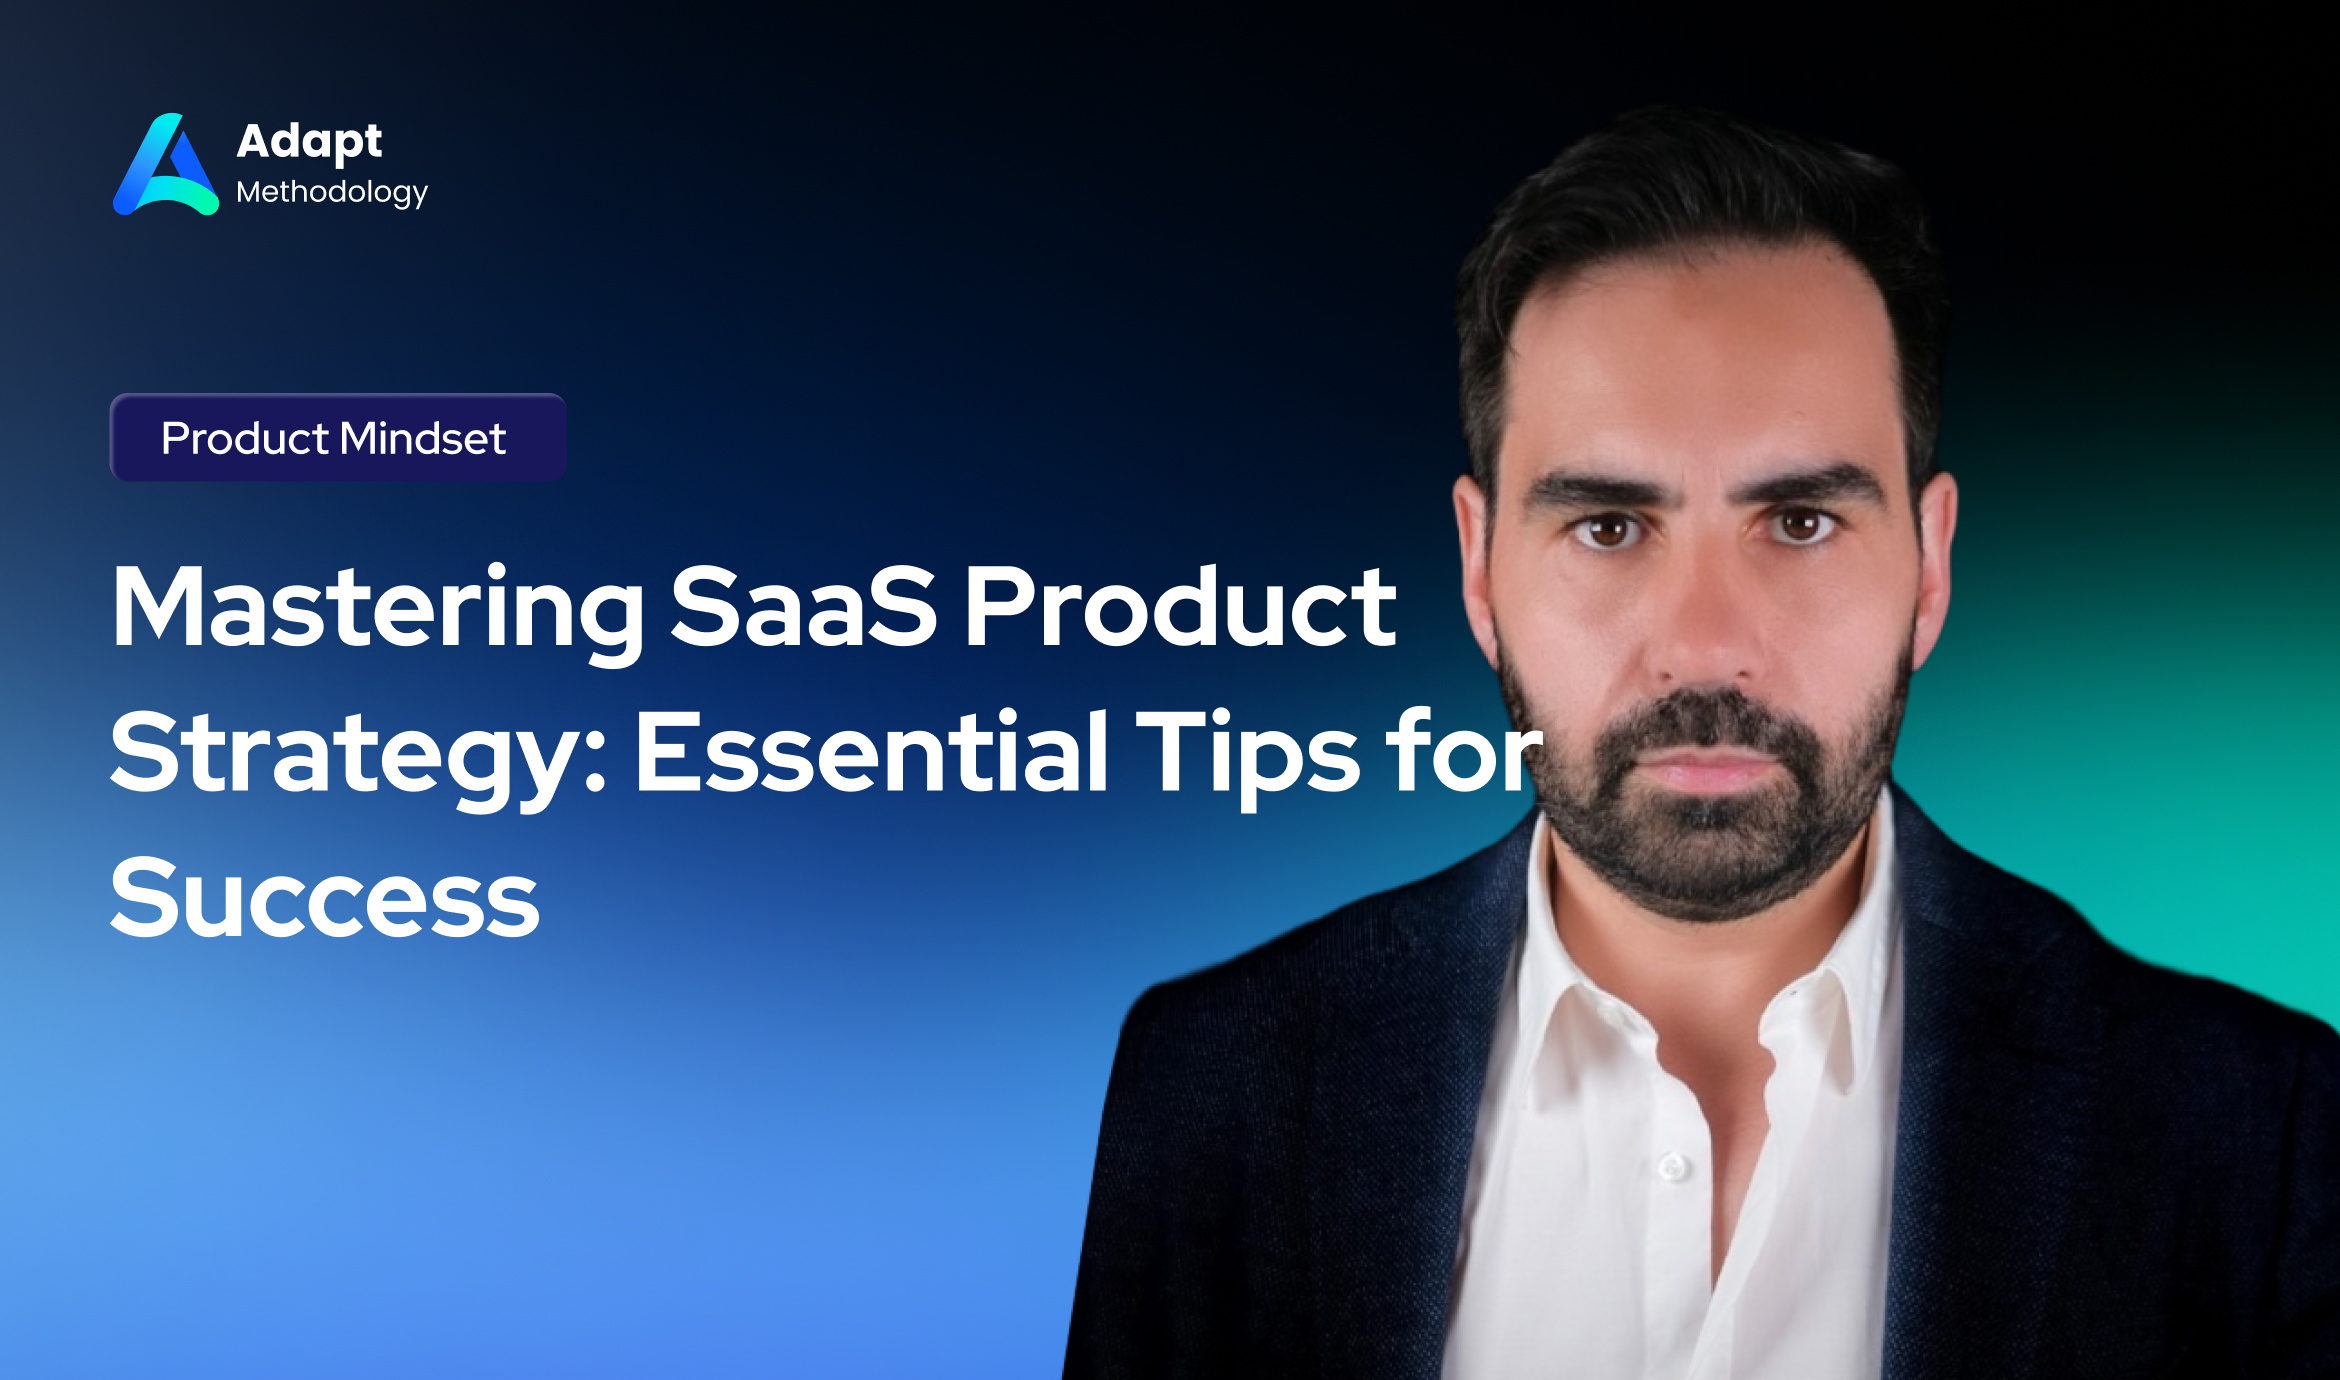 SaaS Product Strategy